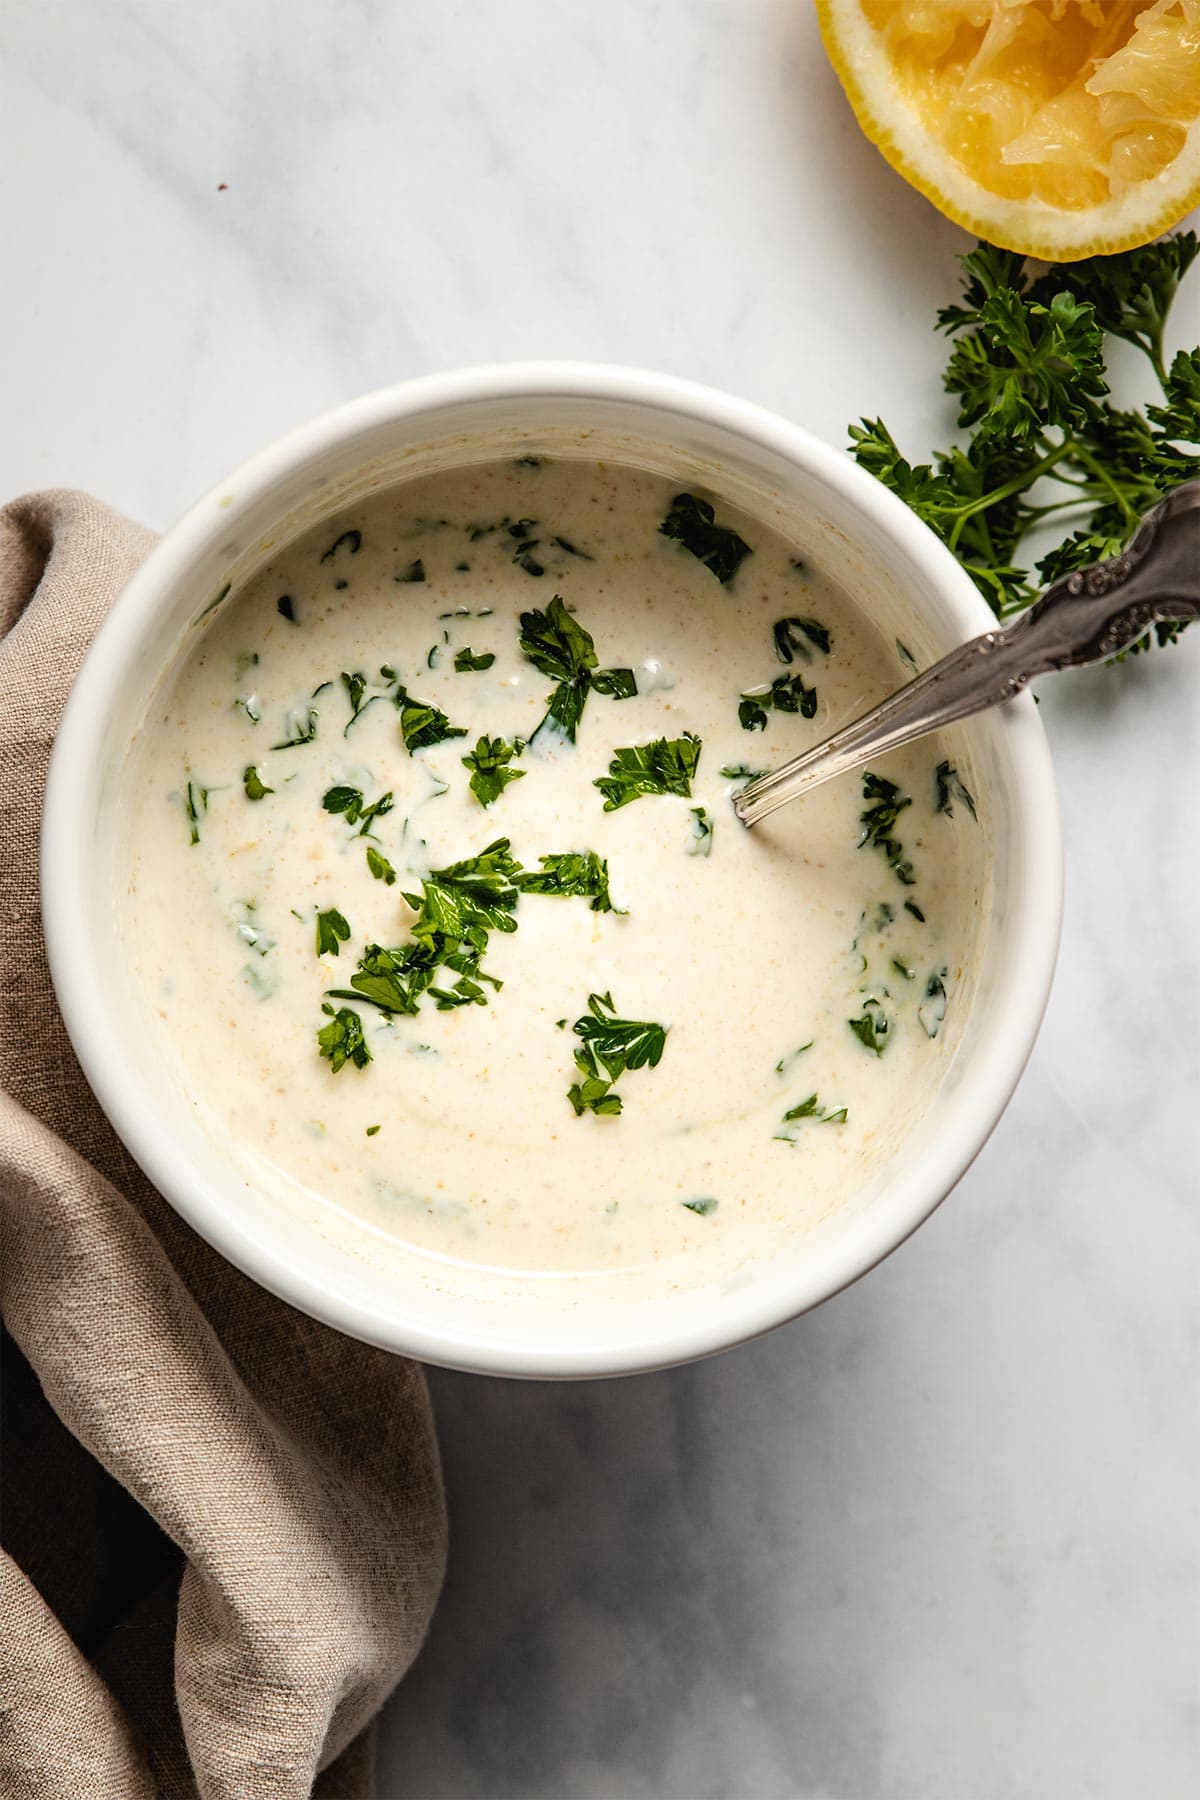 Lemon yogurt sauce in a white bowl garnished with parsley next to a brown linen, parsley and a squeezed lemon half.